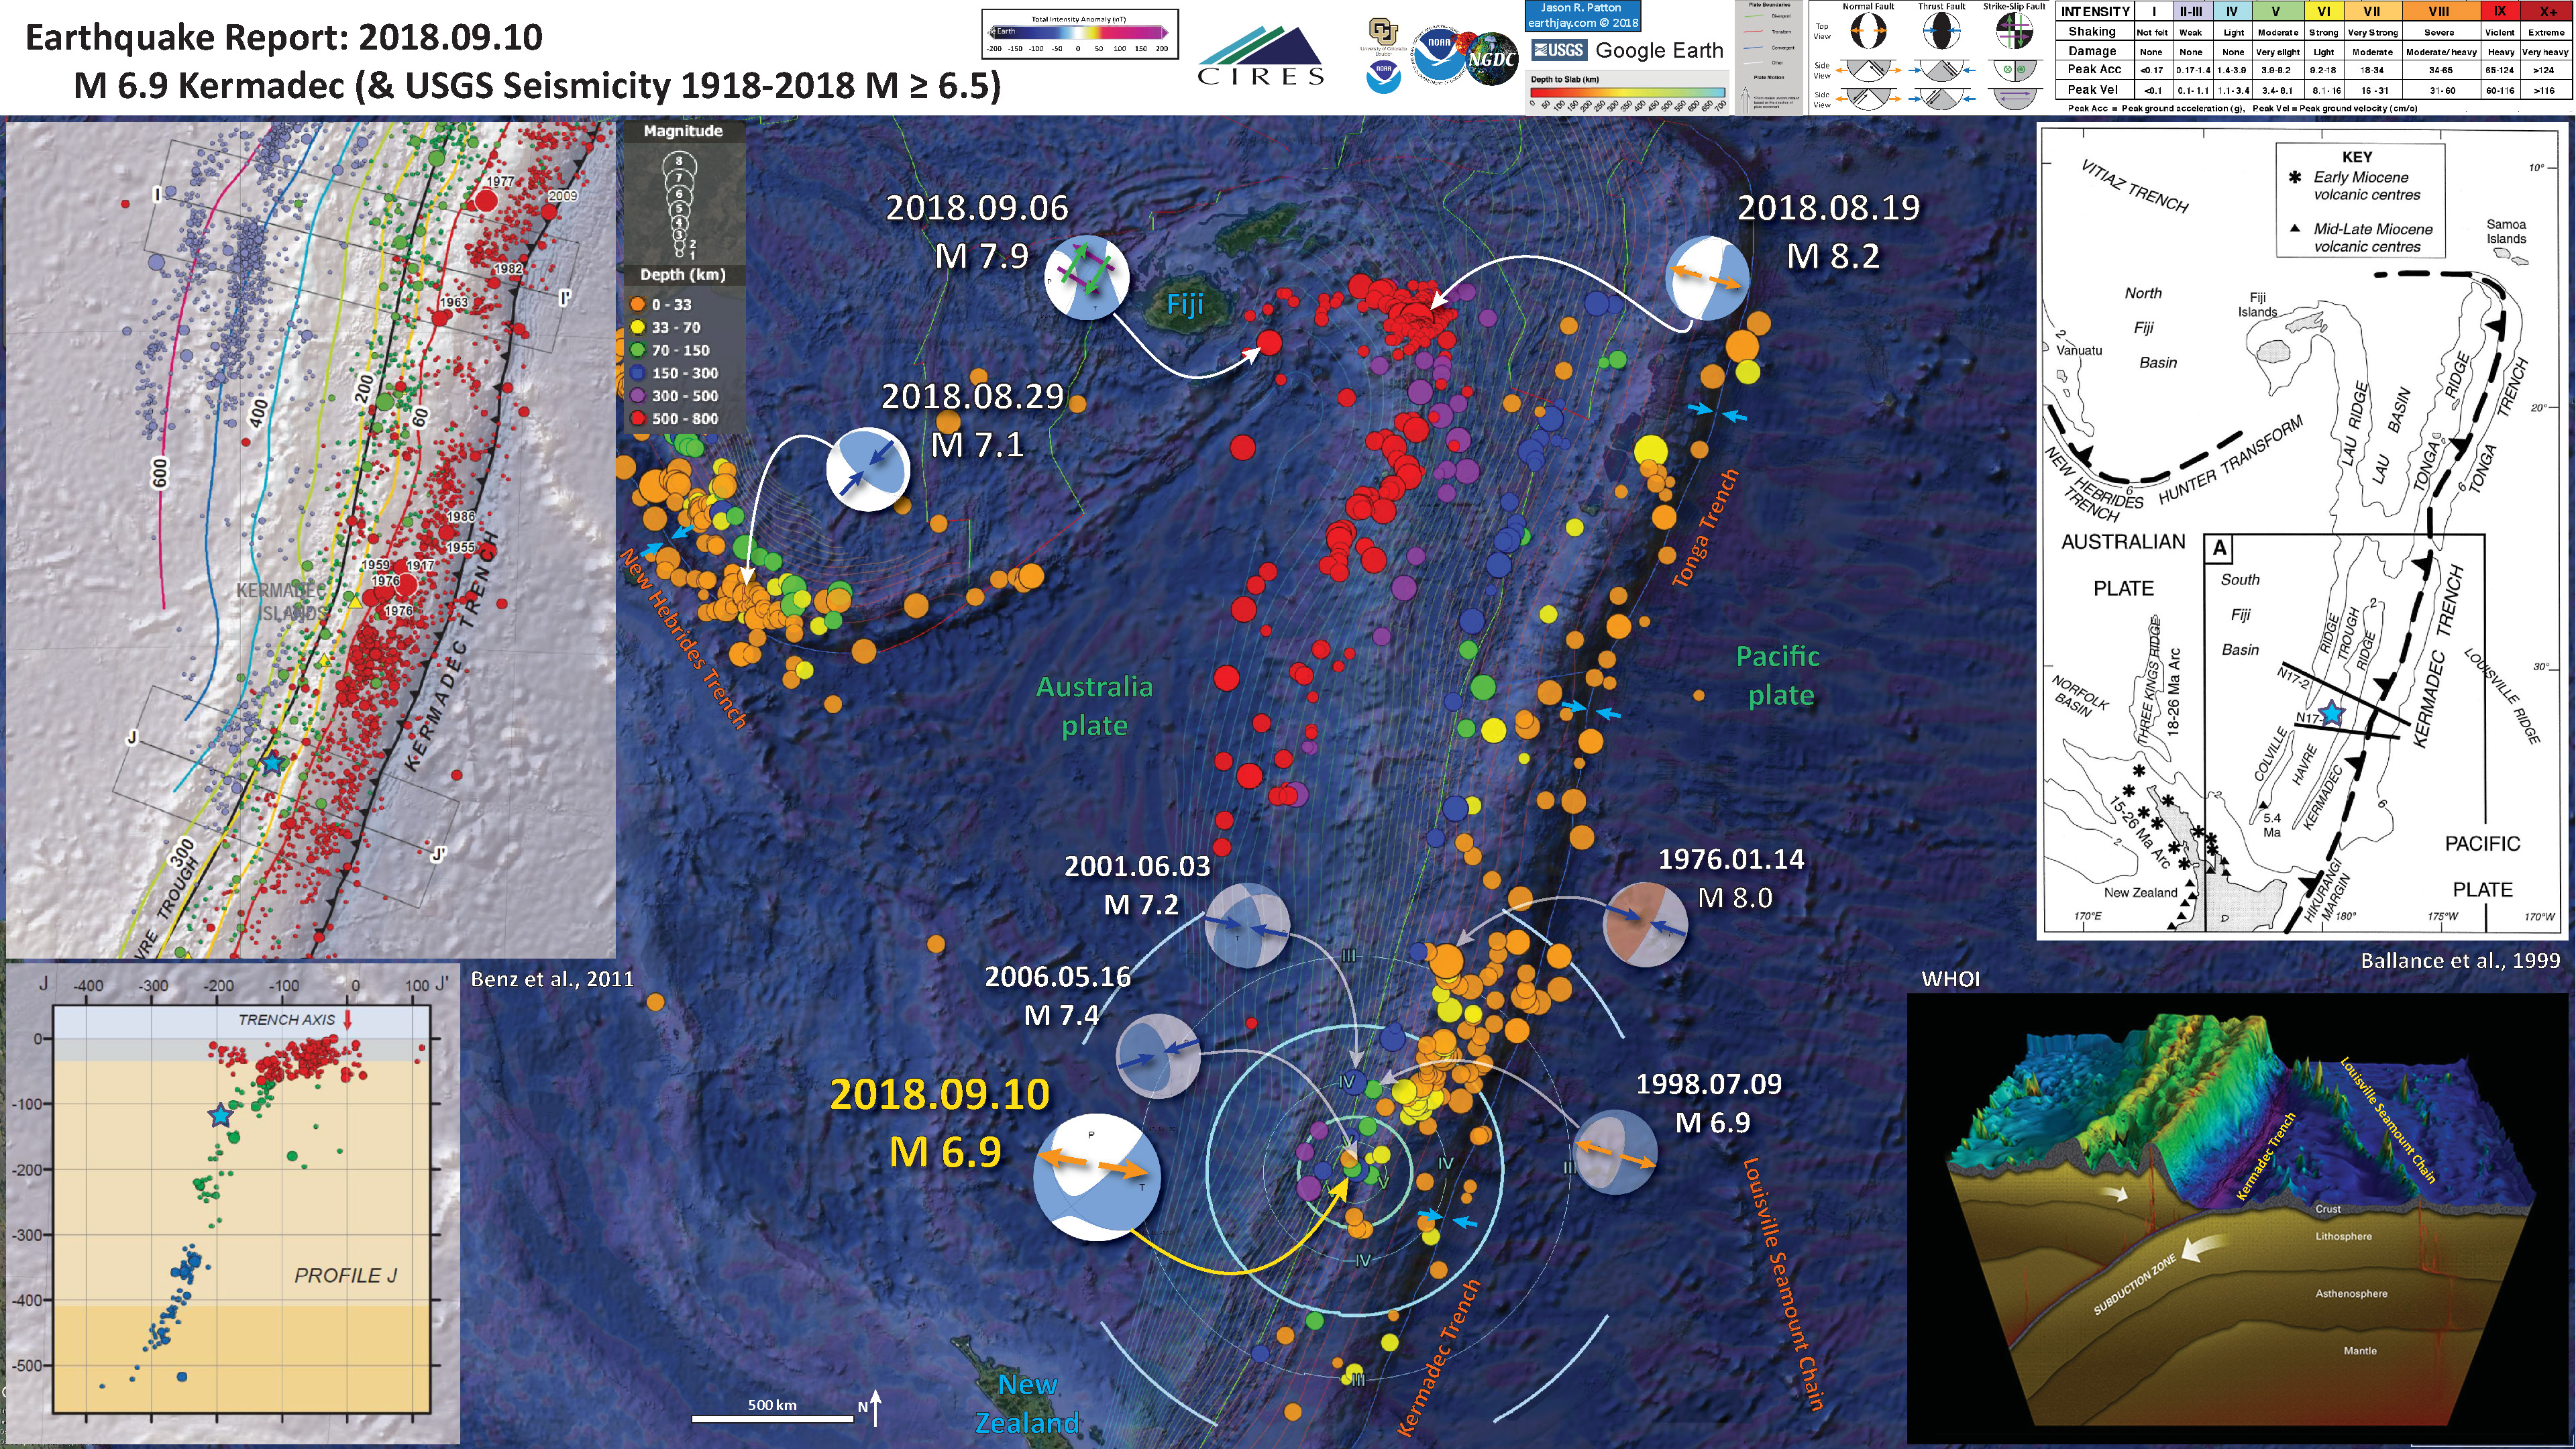 The general survey area on the Louisville Seamount Chain, showing